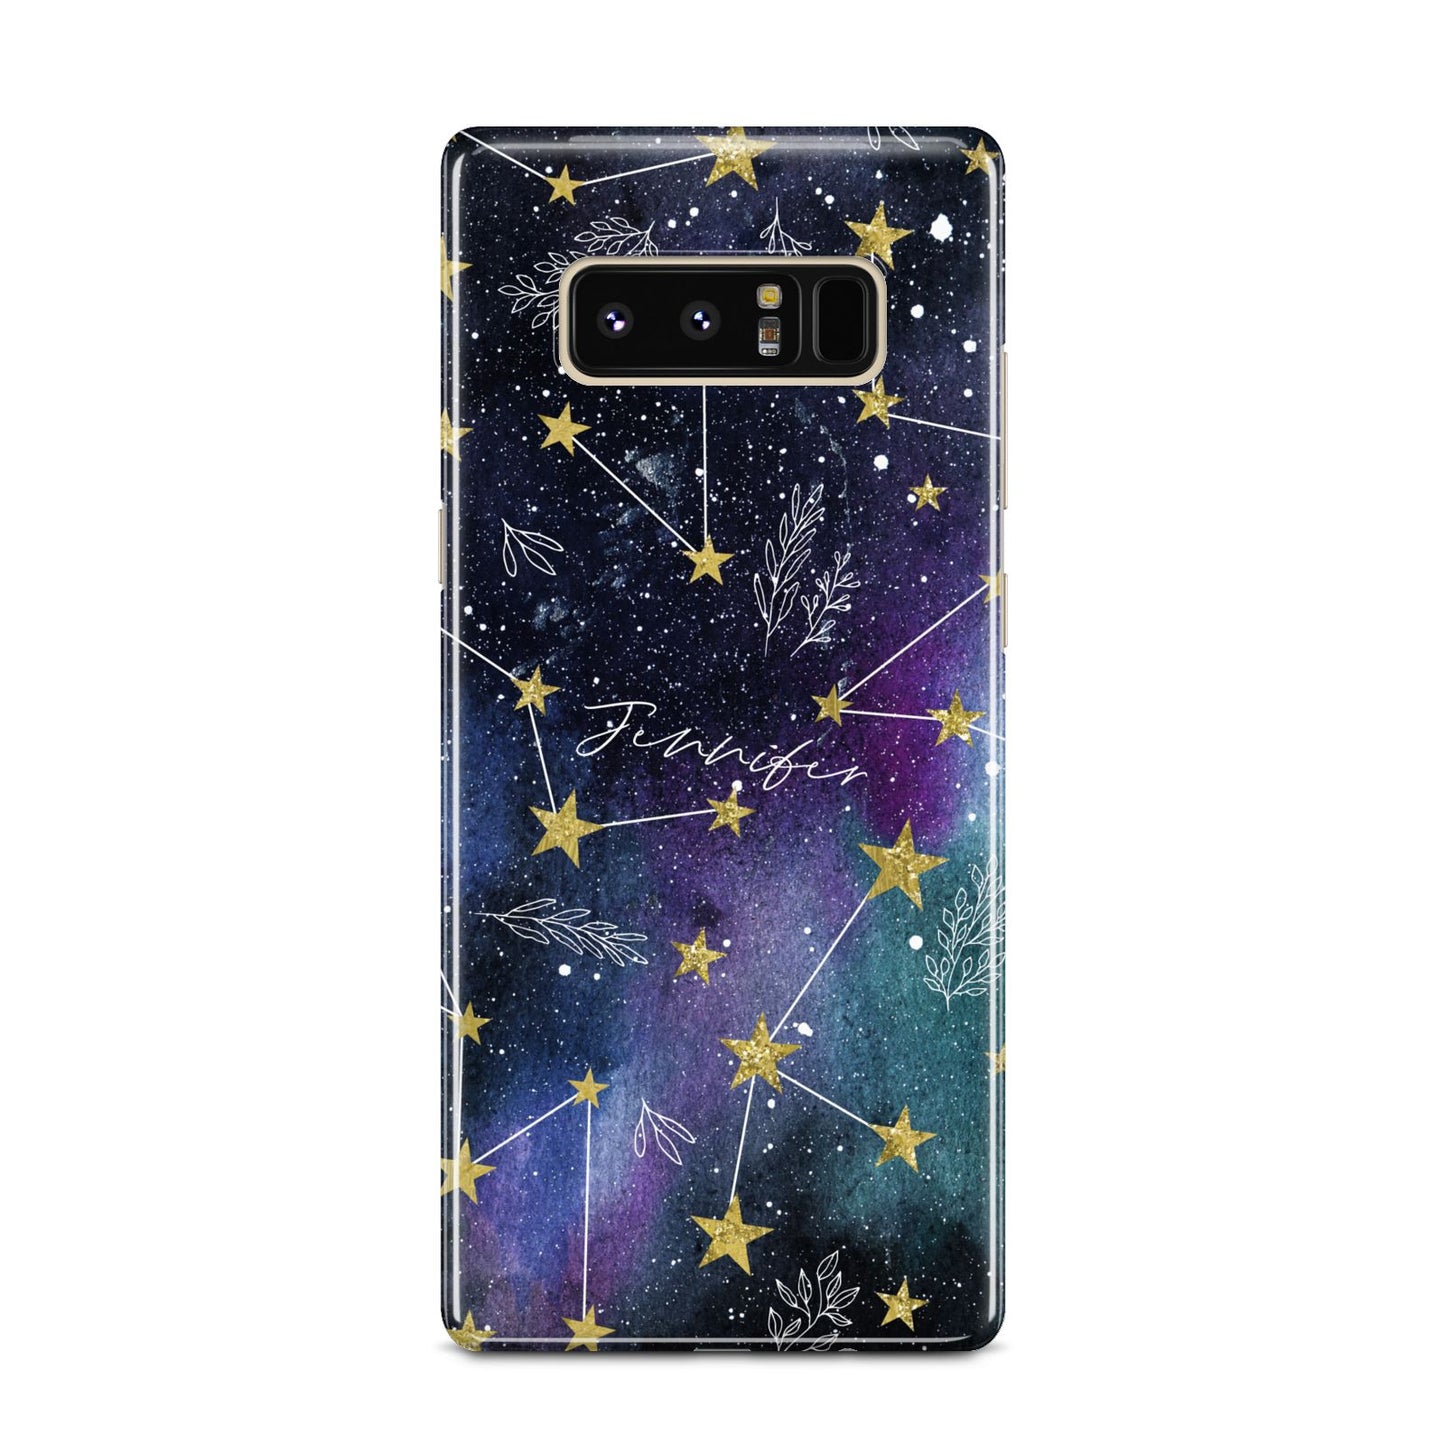 Personalised Constellation Samsung Galaxy Note 8 Case